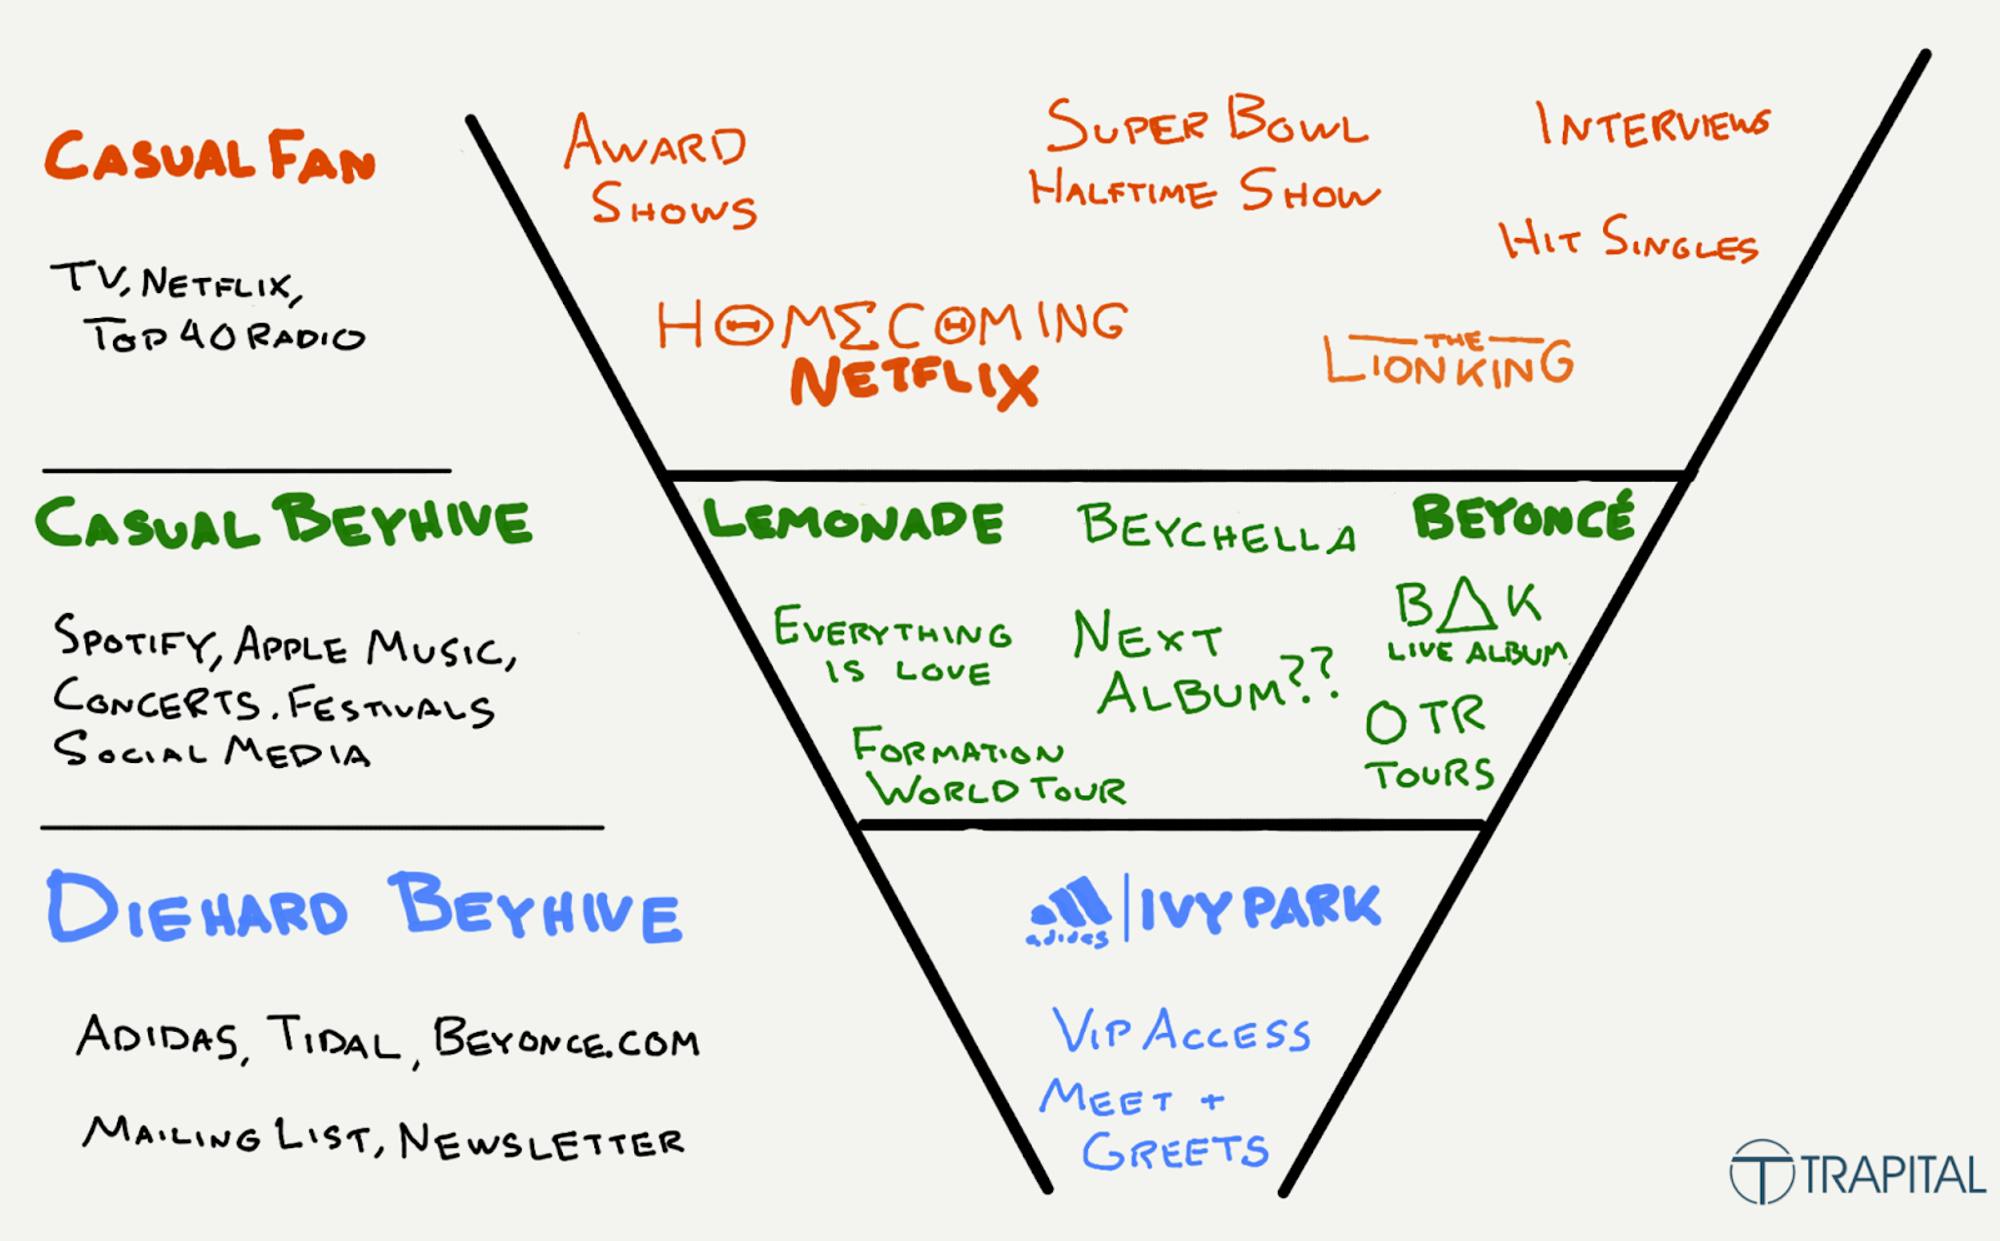 It’s time to update the Beyonce sales funnel